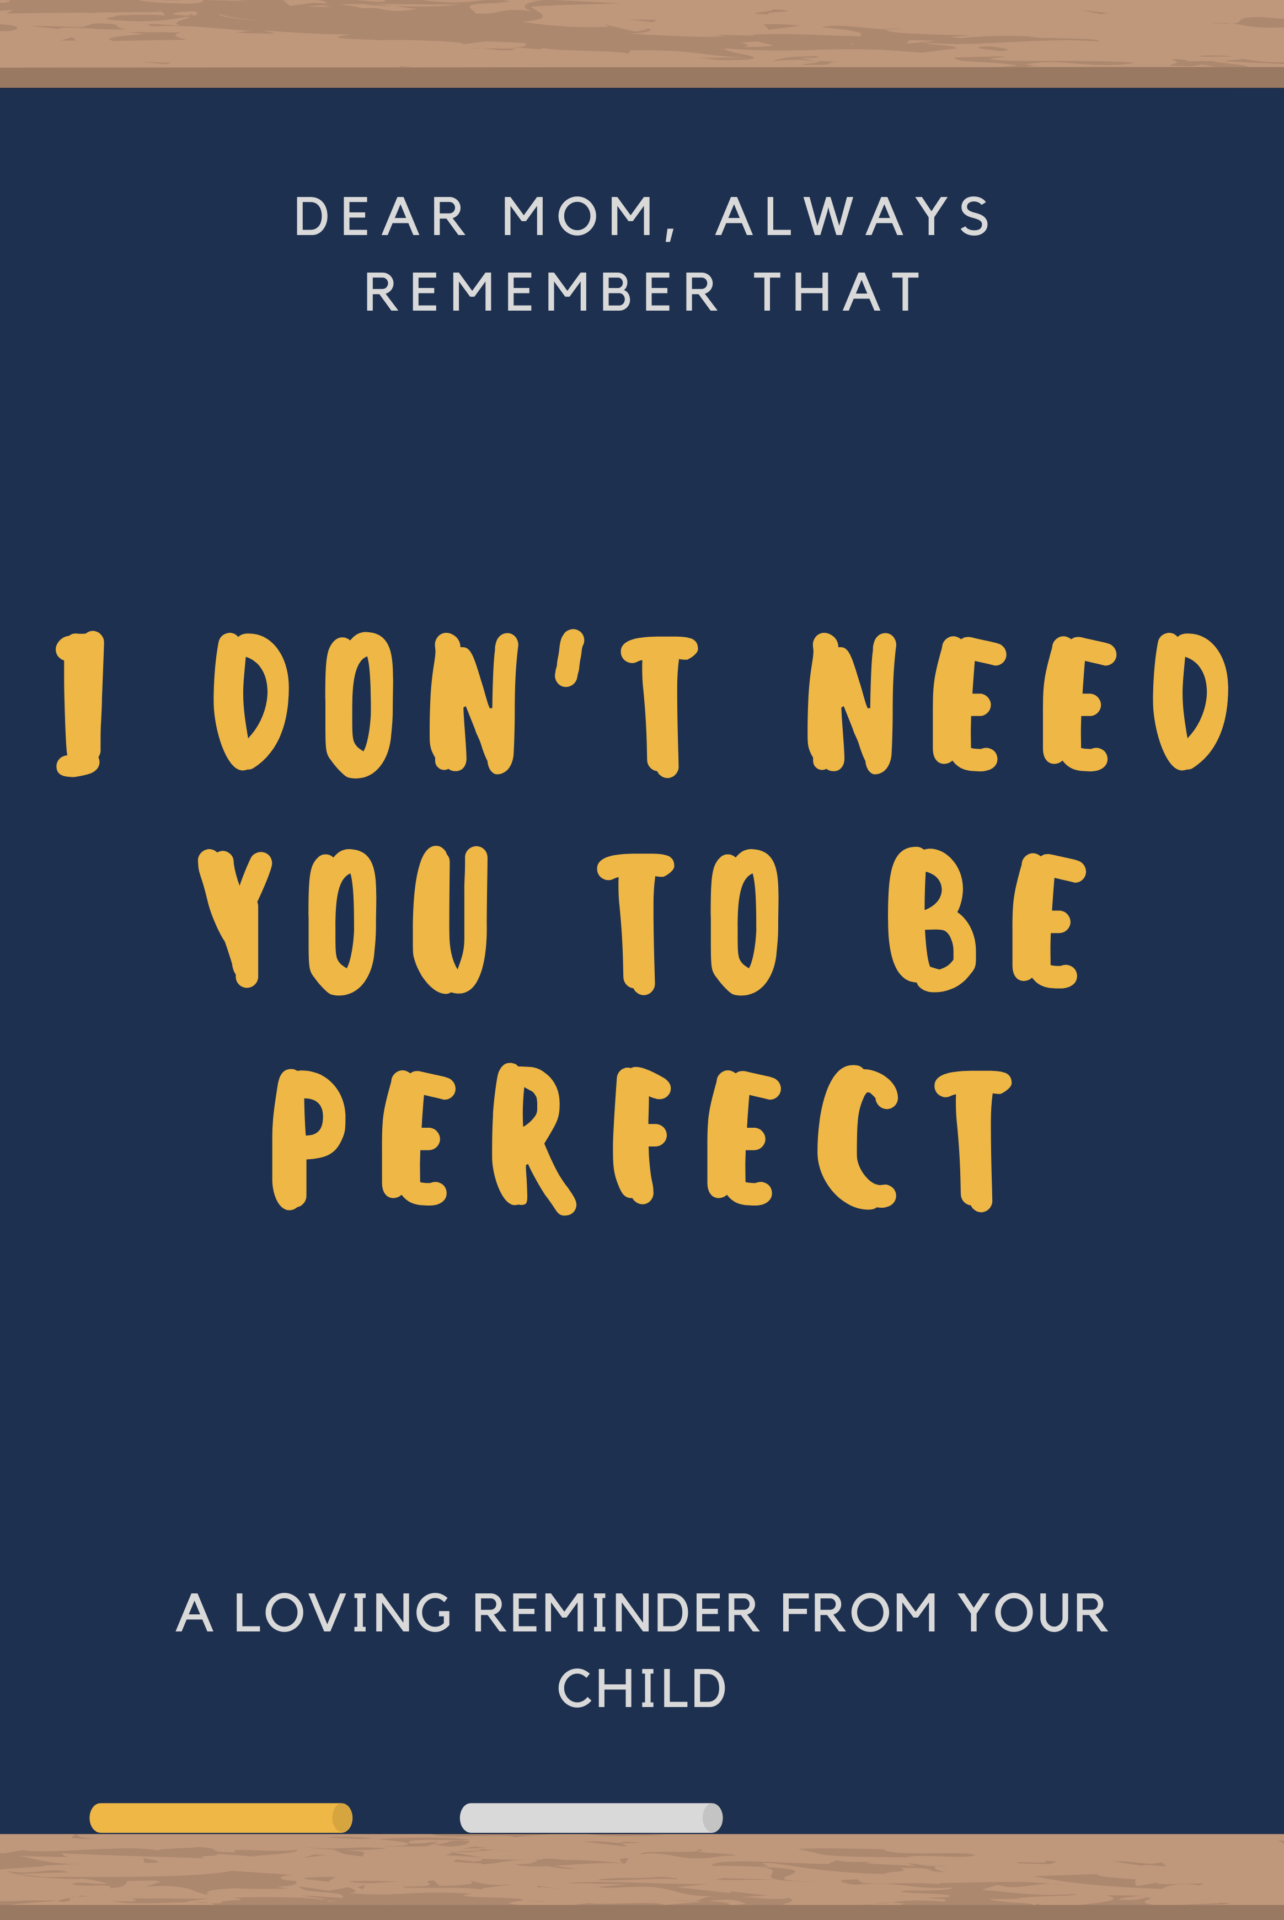 I don't need you to be perfect